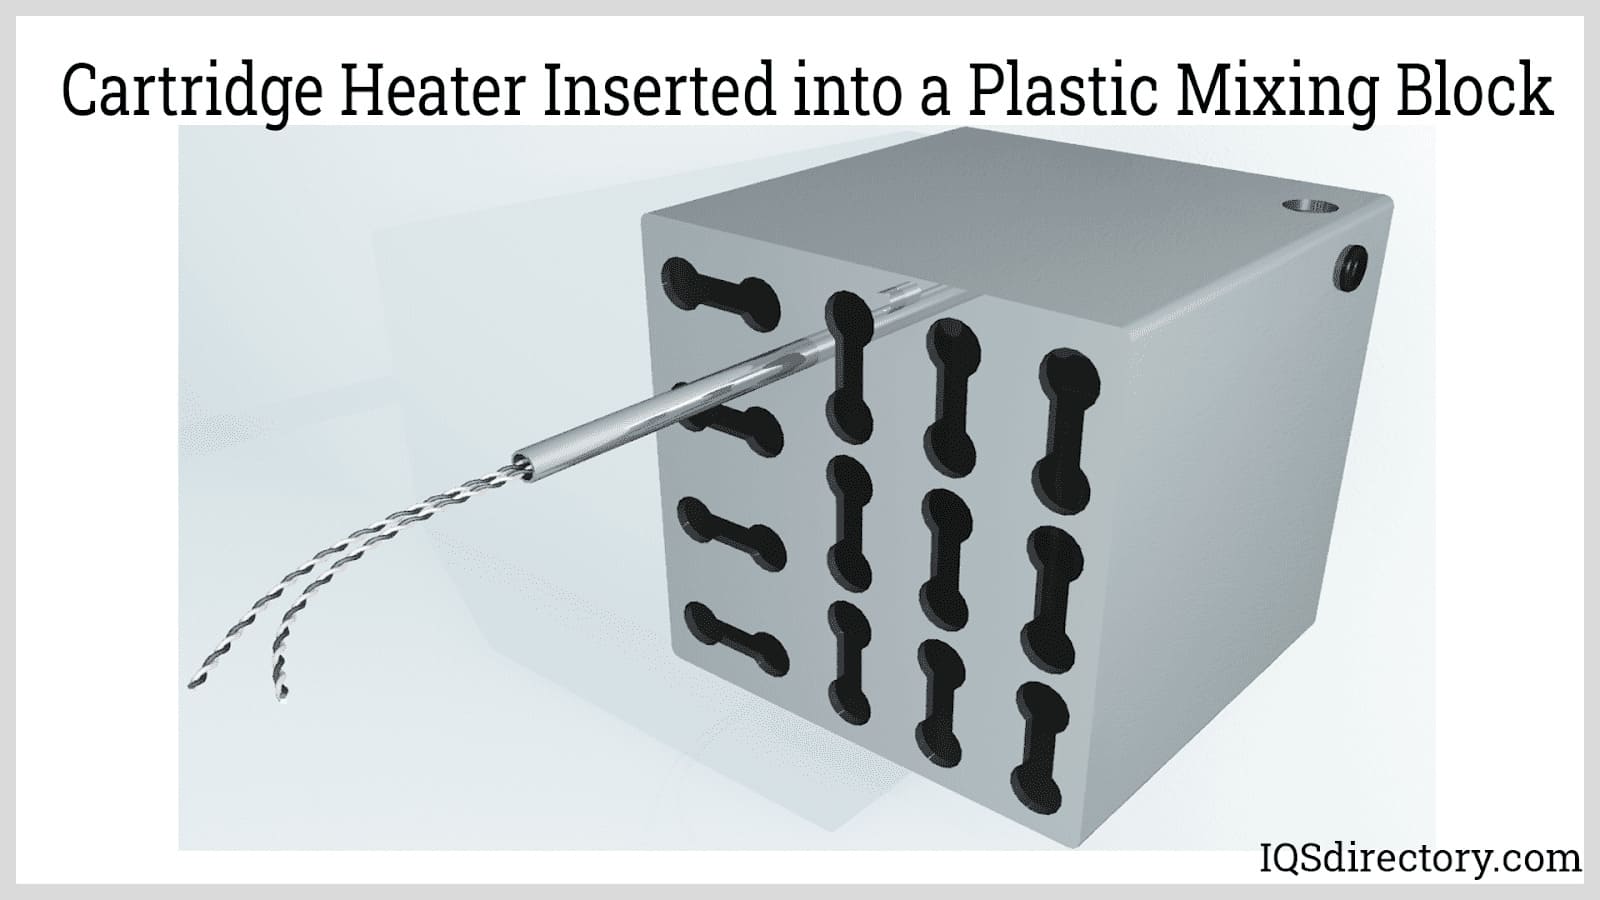 Cartridge Heater Inserted into a Plastic Mixing Block